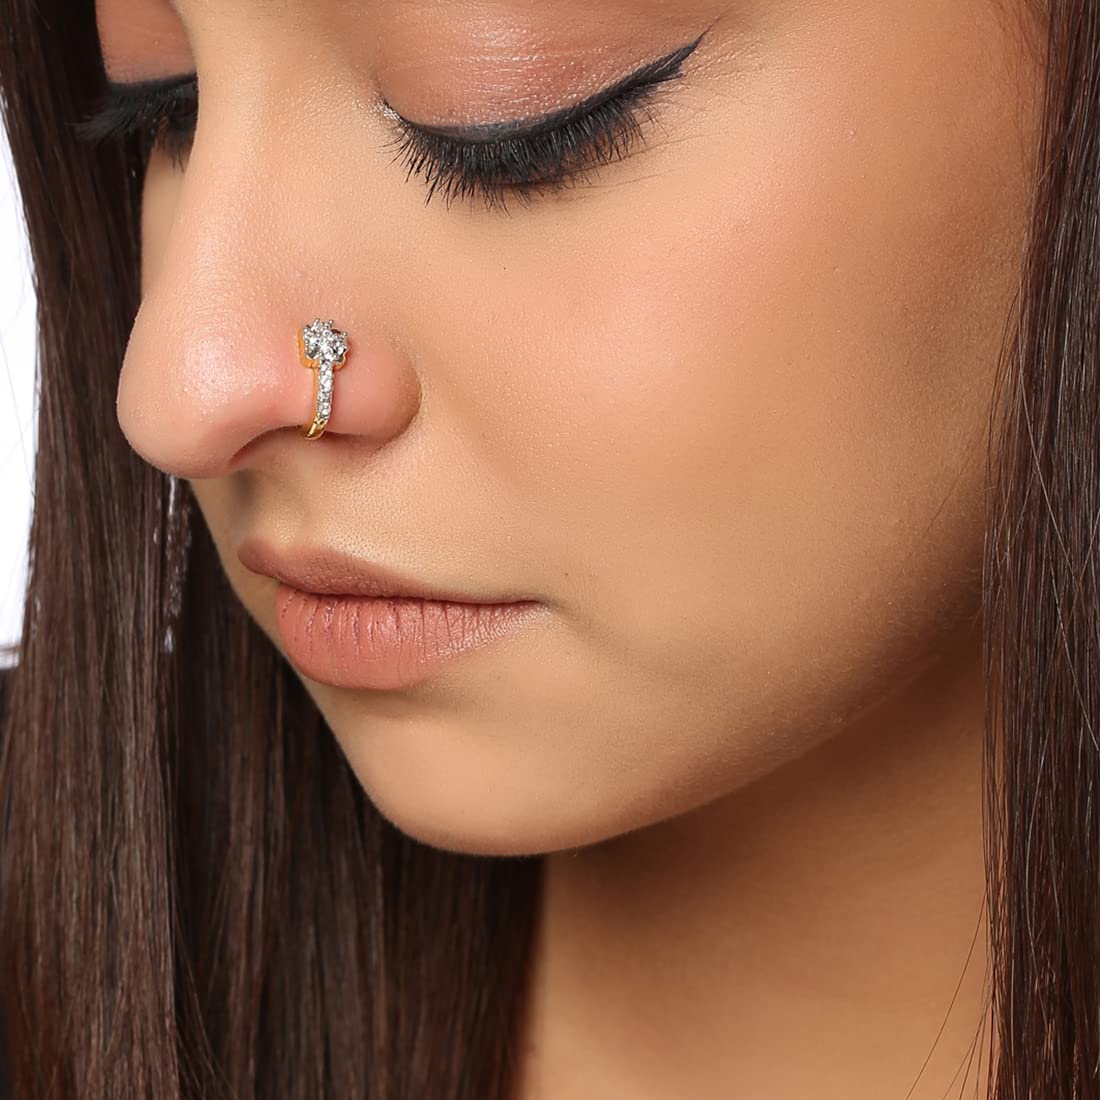 Is My Nose Ring the Appropriate Size? : r/piercing